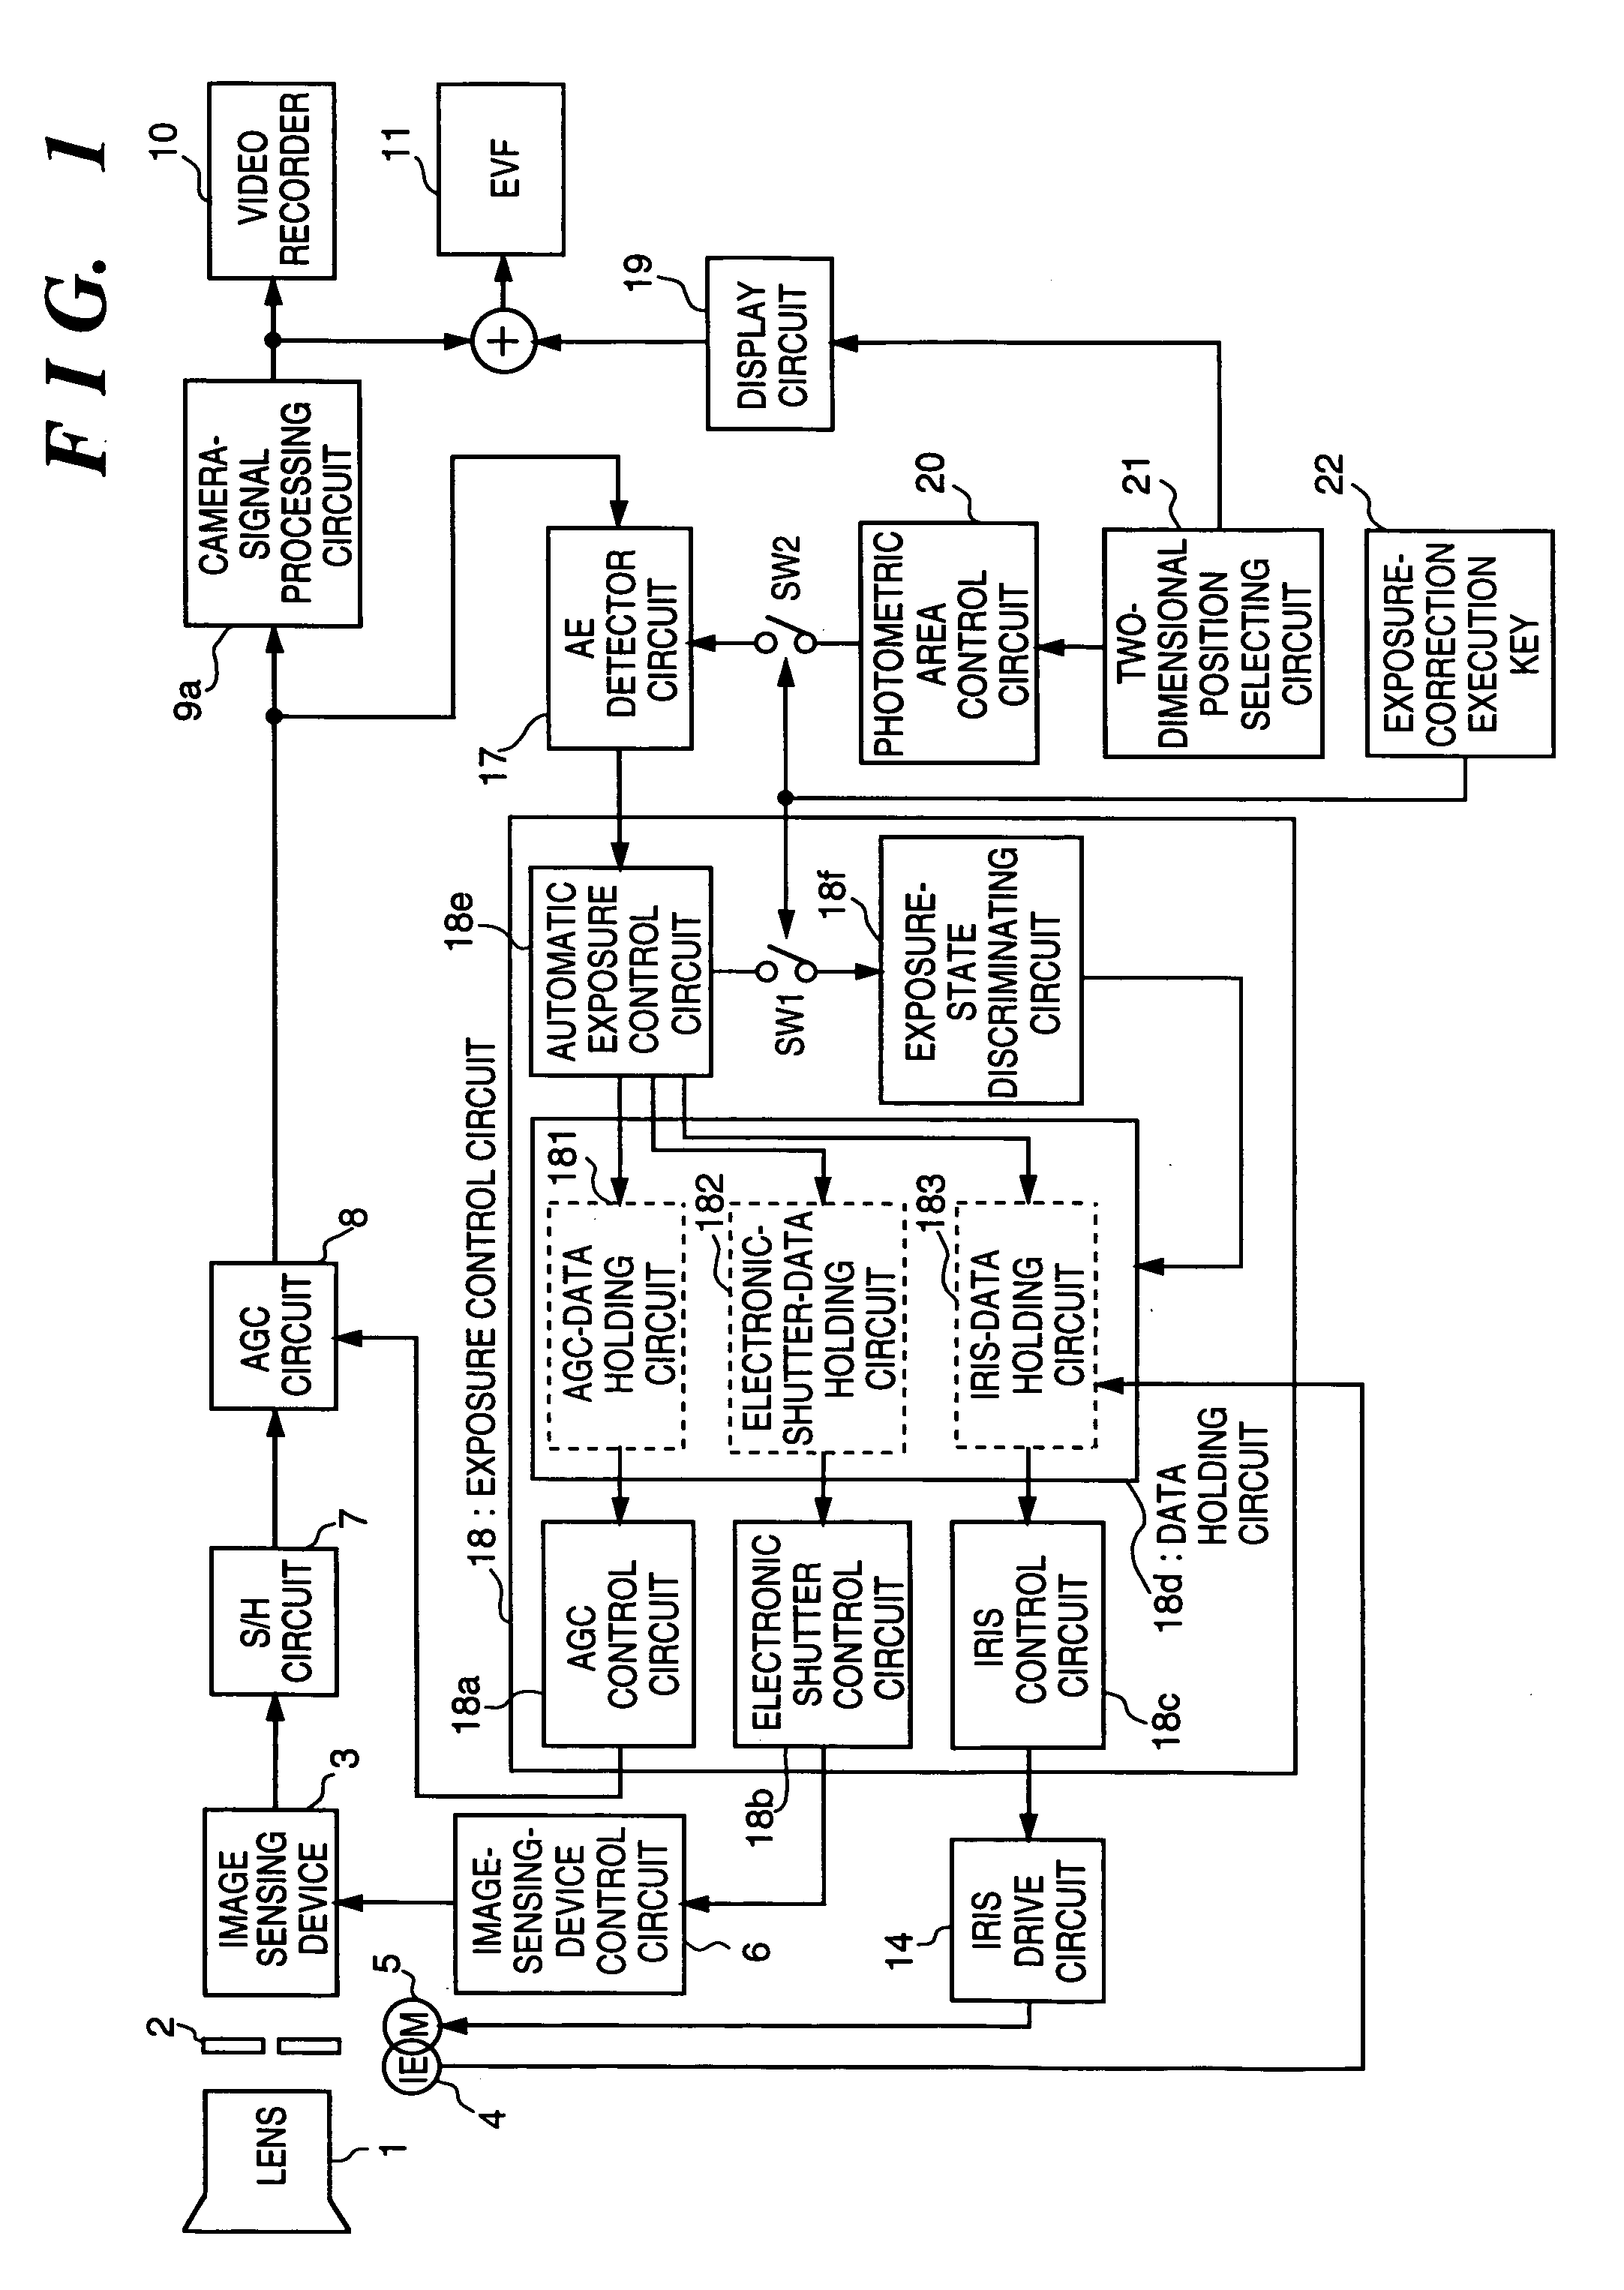 Image sensing apparatus which carries out optimum exposure control of subject